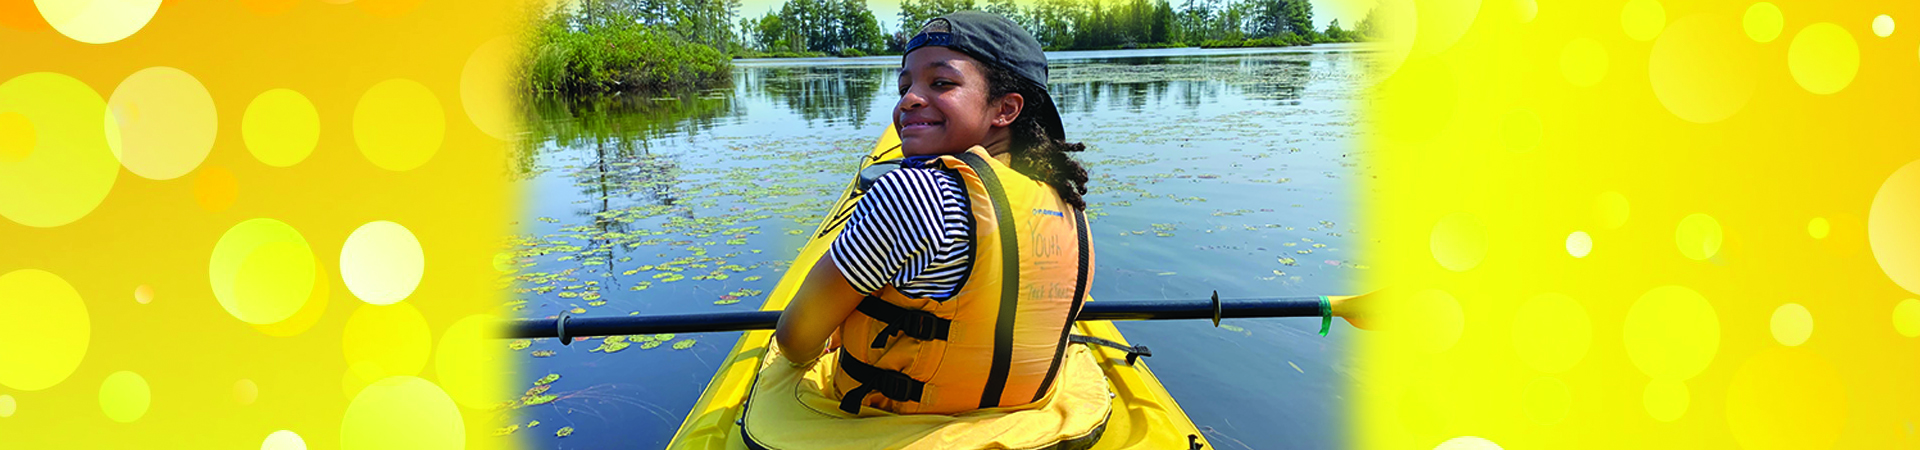  Girl Scout in kayak at summer camp 